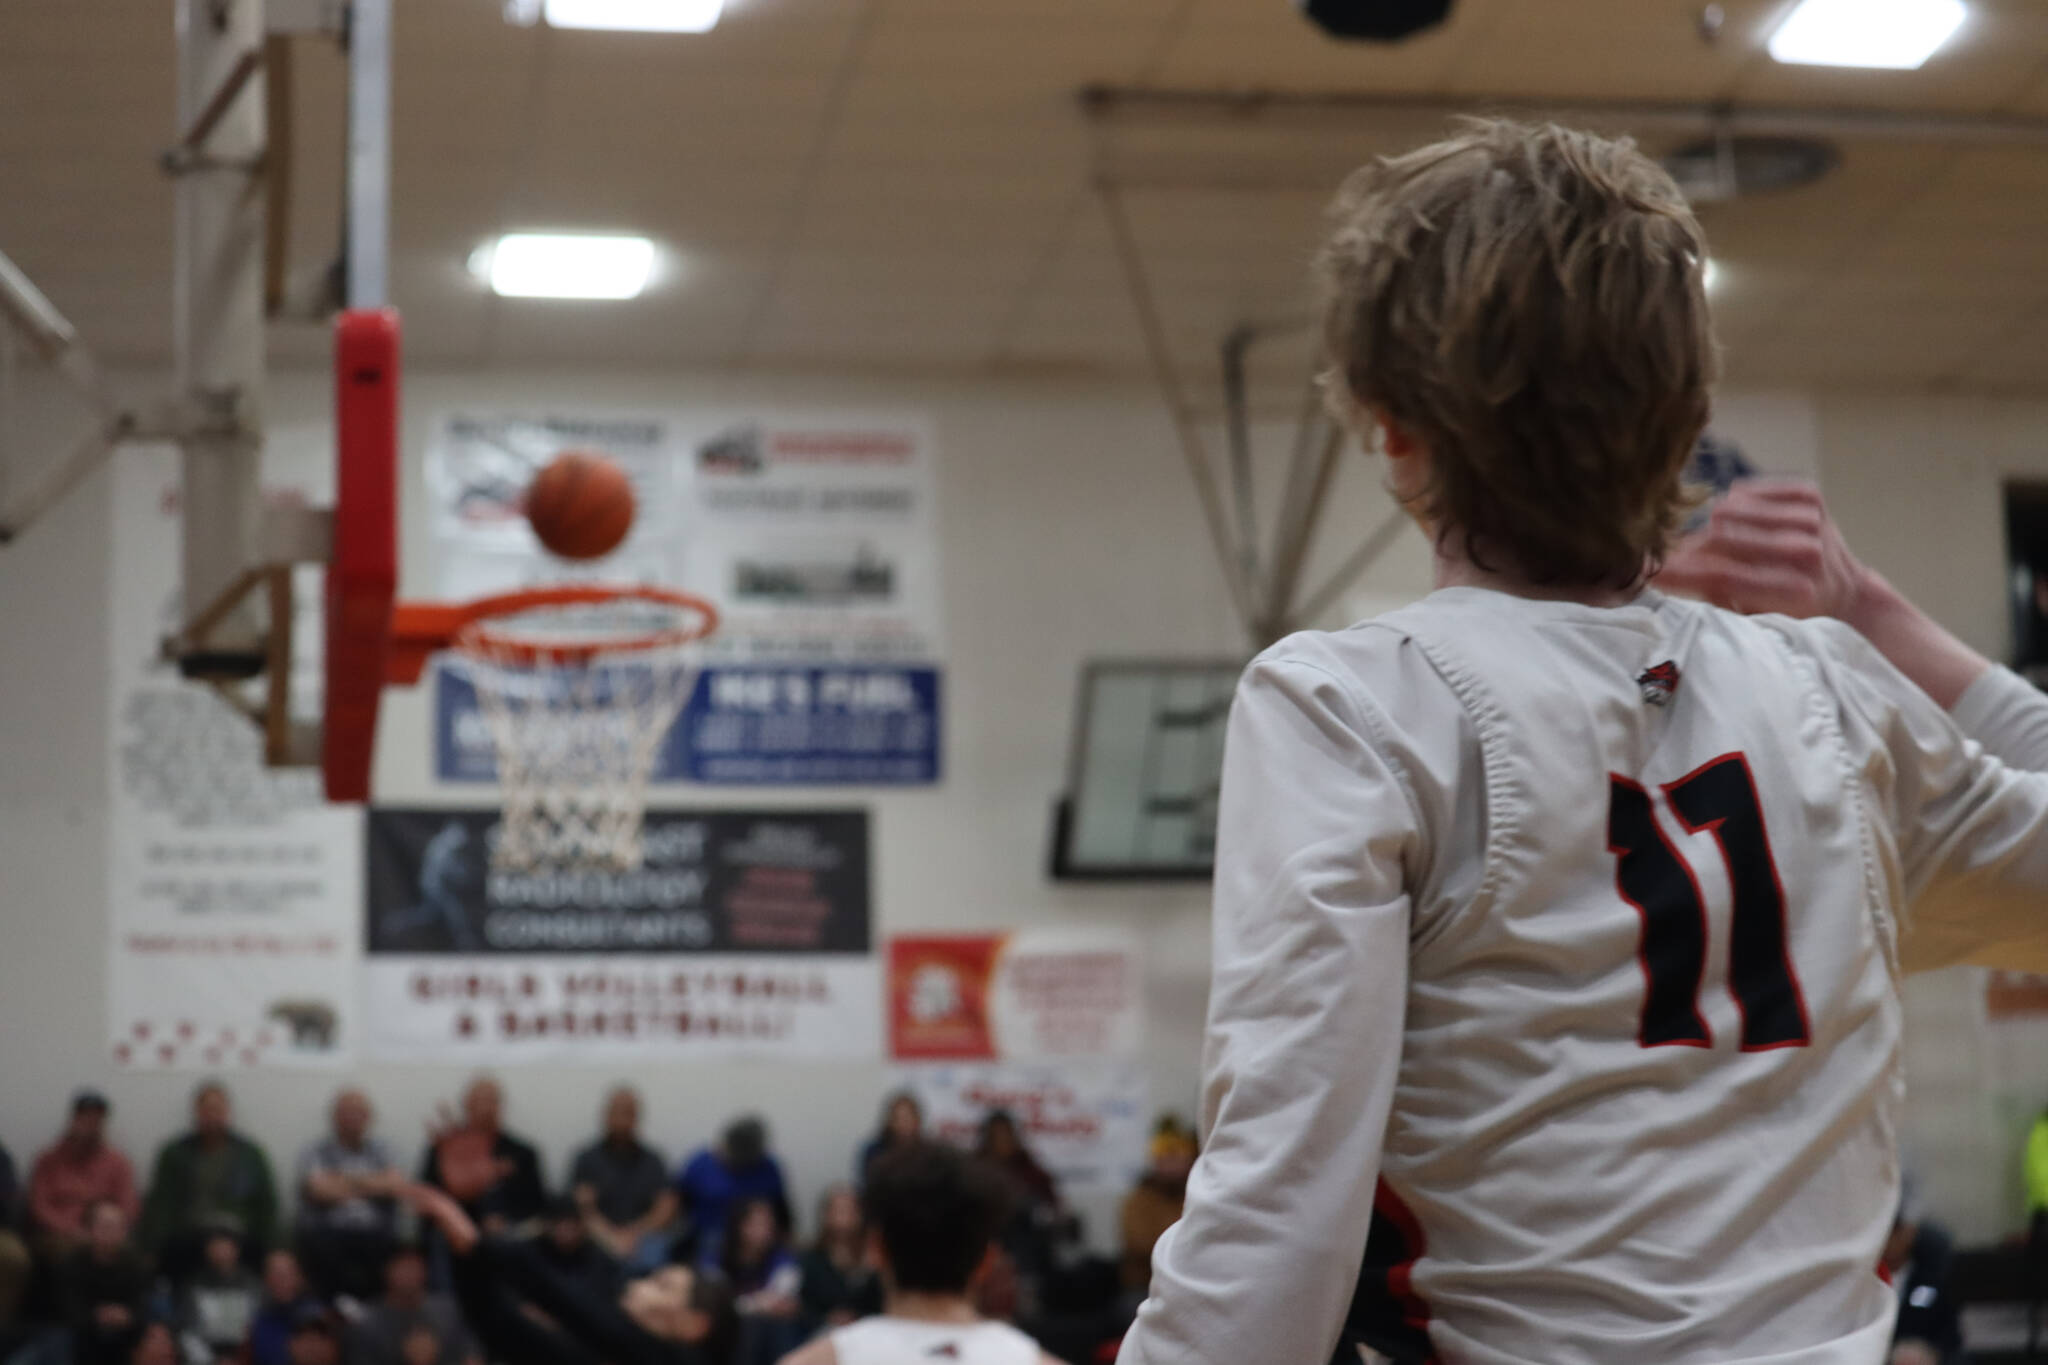 JDHS junior guard Sean Oliver watches as he sinks a 3-point shot during Friday’s game against West Valley High School for the closing game of the Capital City Classic tournament. Oliver led the Crimson Bears Boys team with a total of 12 points. (Jonson Kuhn / Juneau Empire)